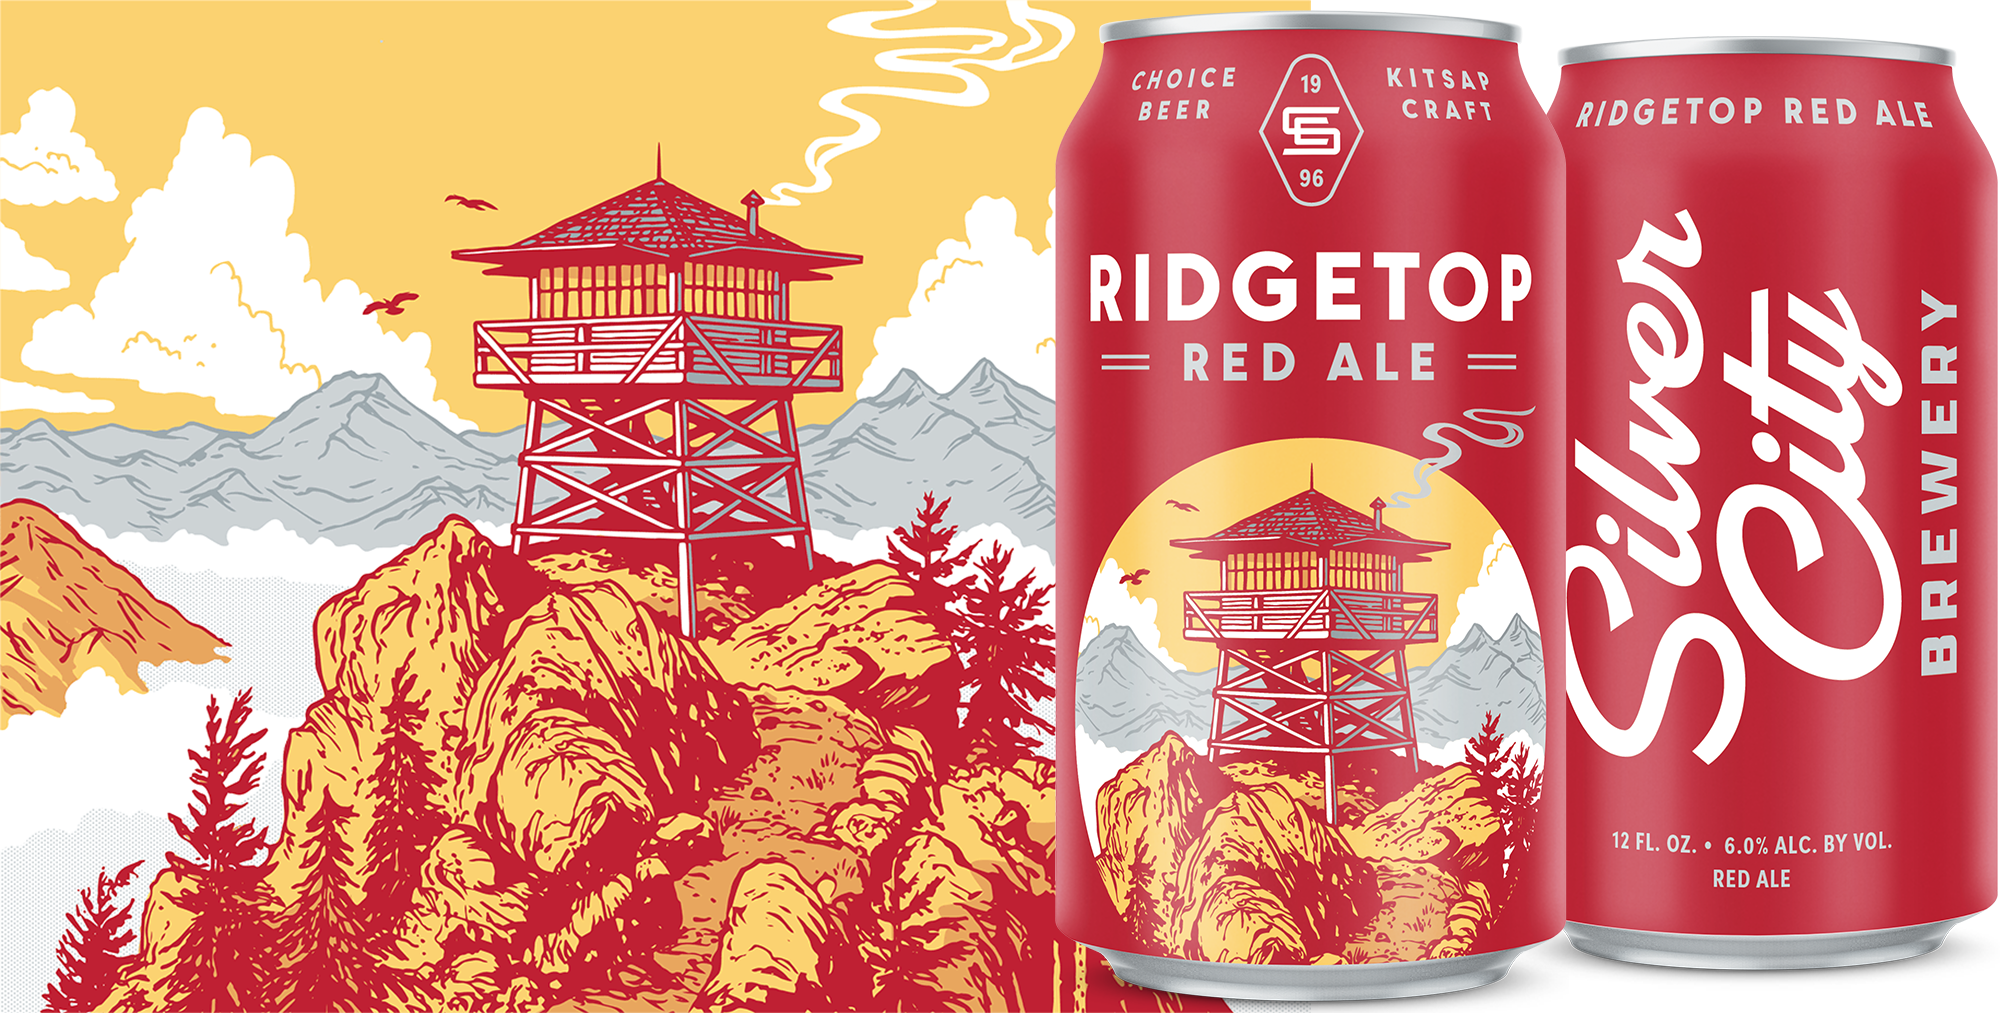 Silver City Brewery Ridgetop Red Ale